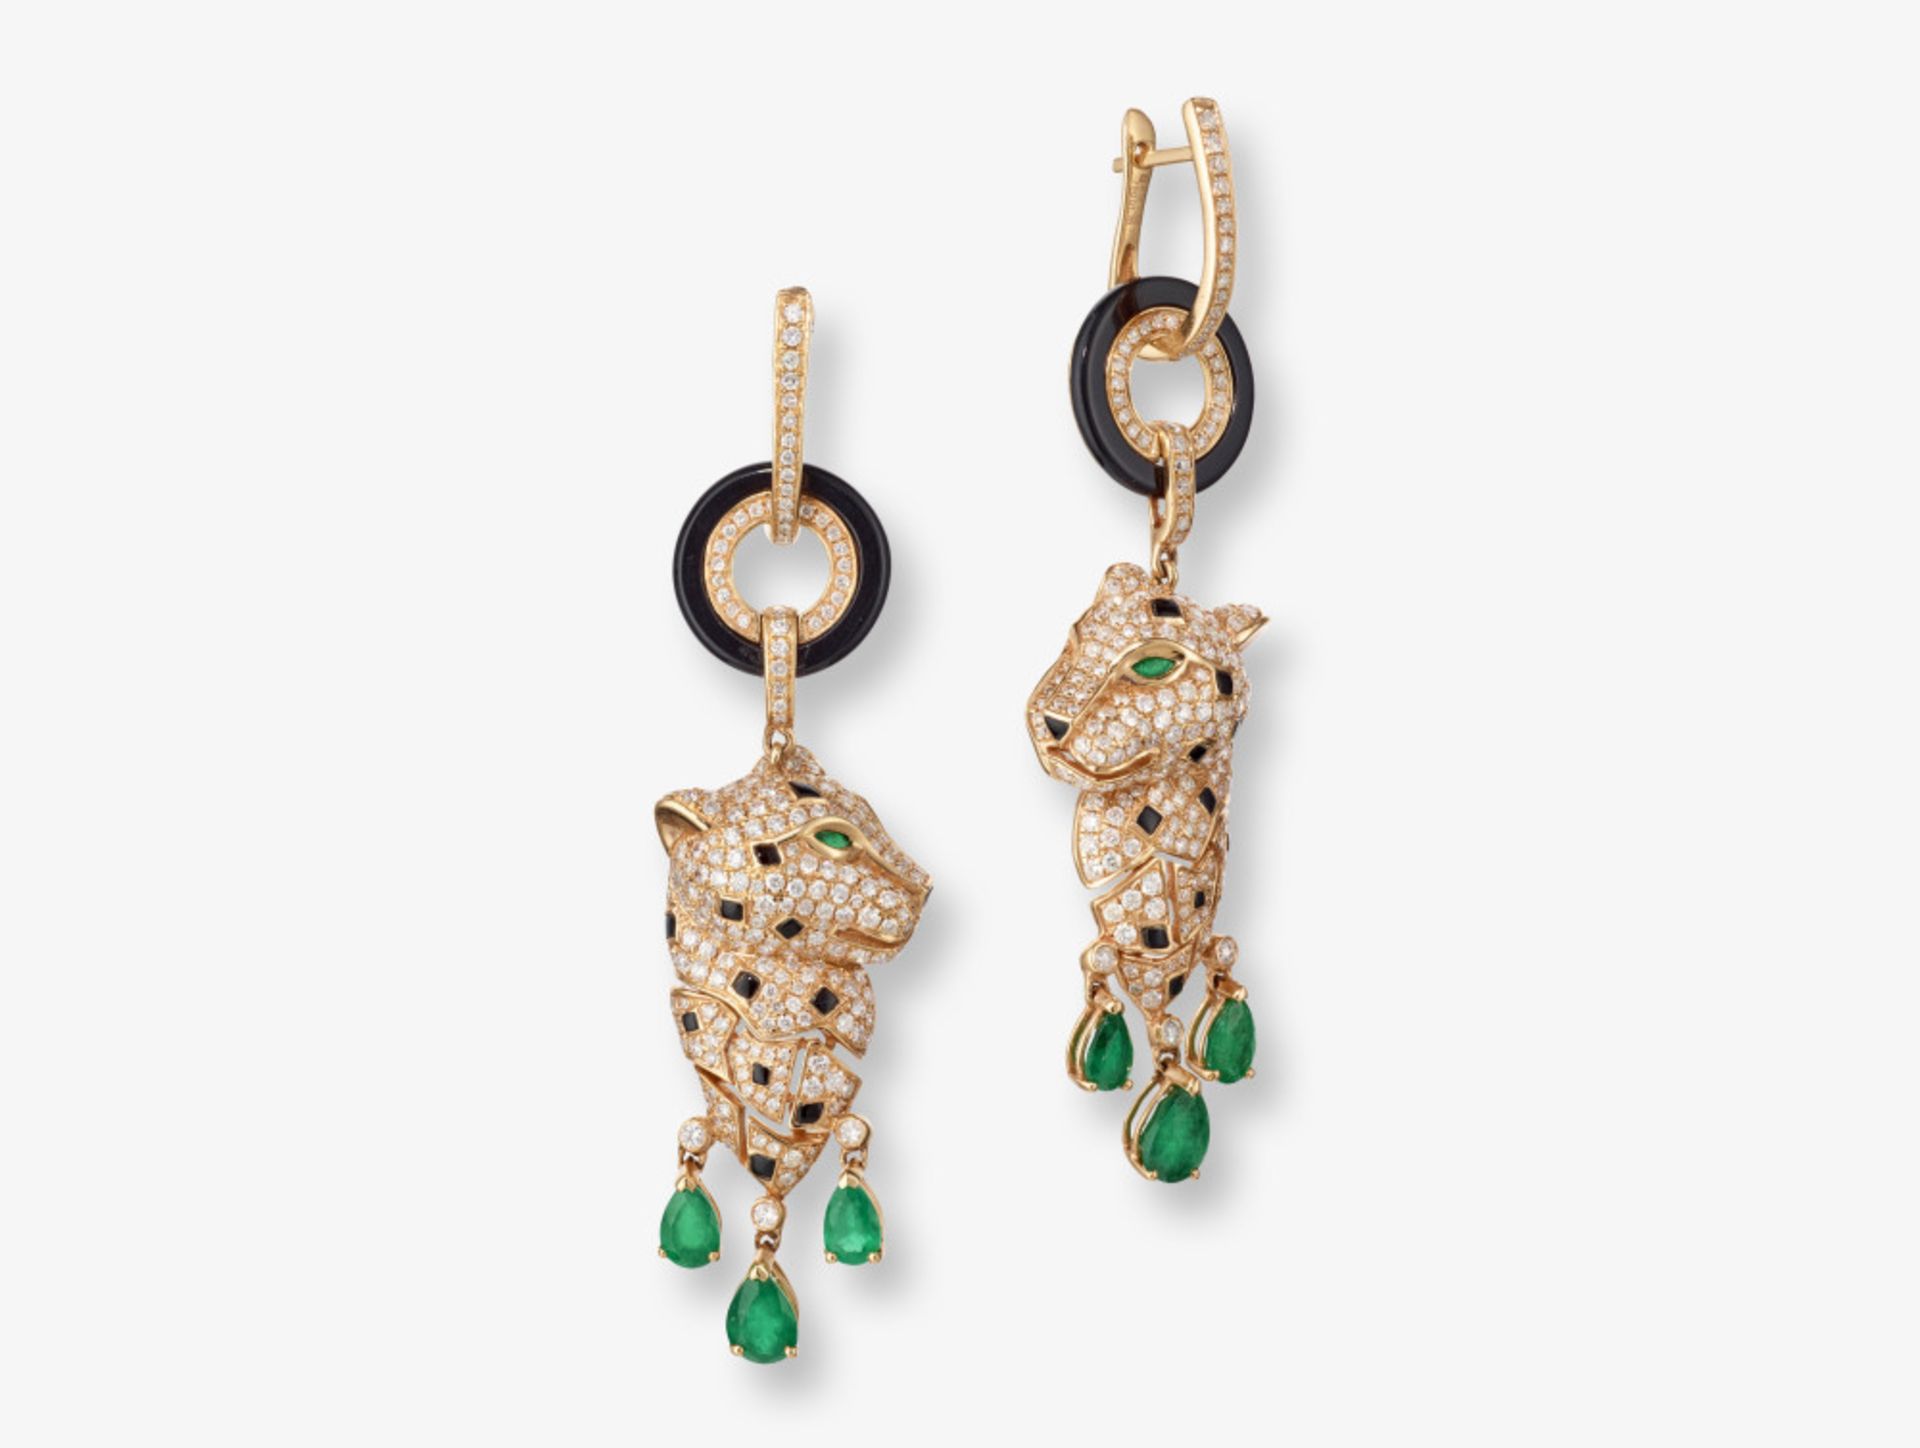 Convertible drop earrings with a panther motif decorated with brilliant cut diamonds, emeralds and o